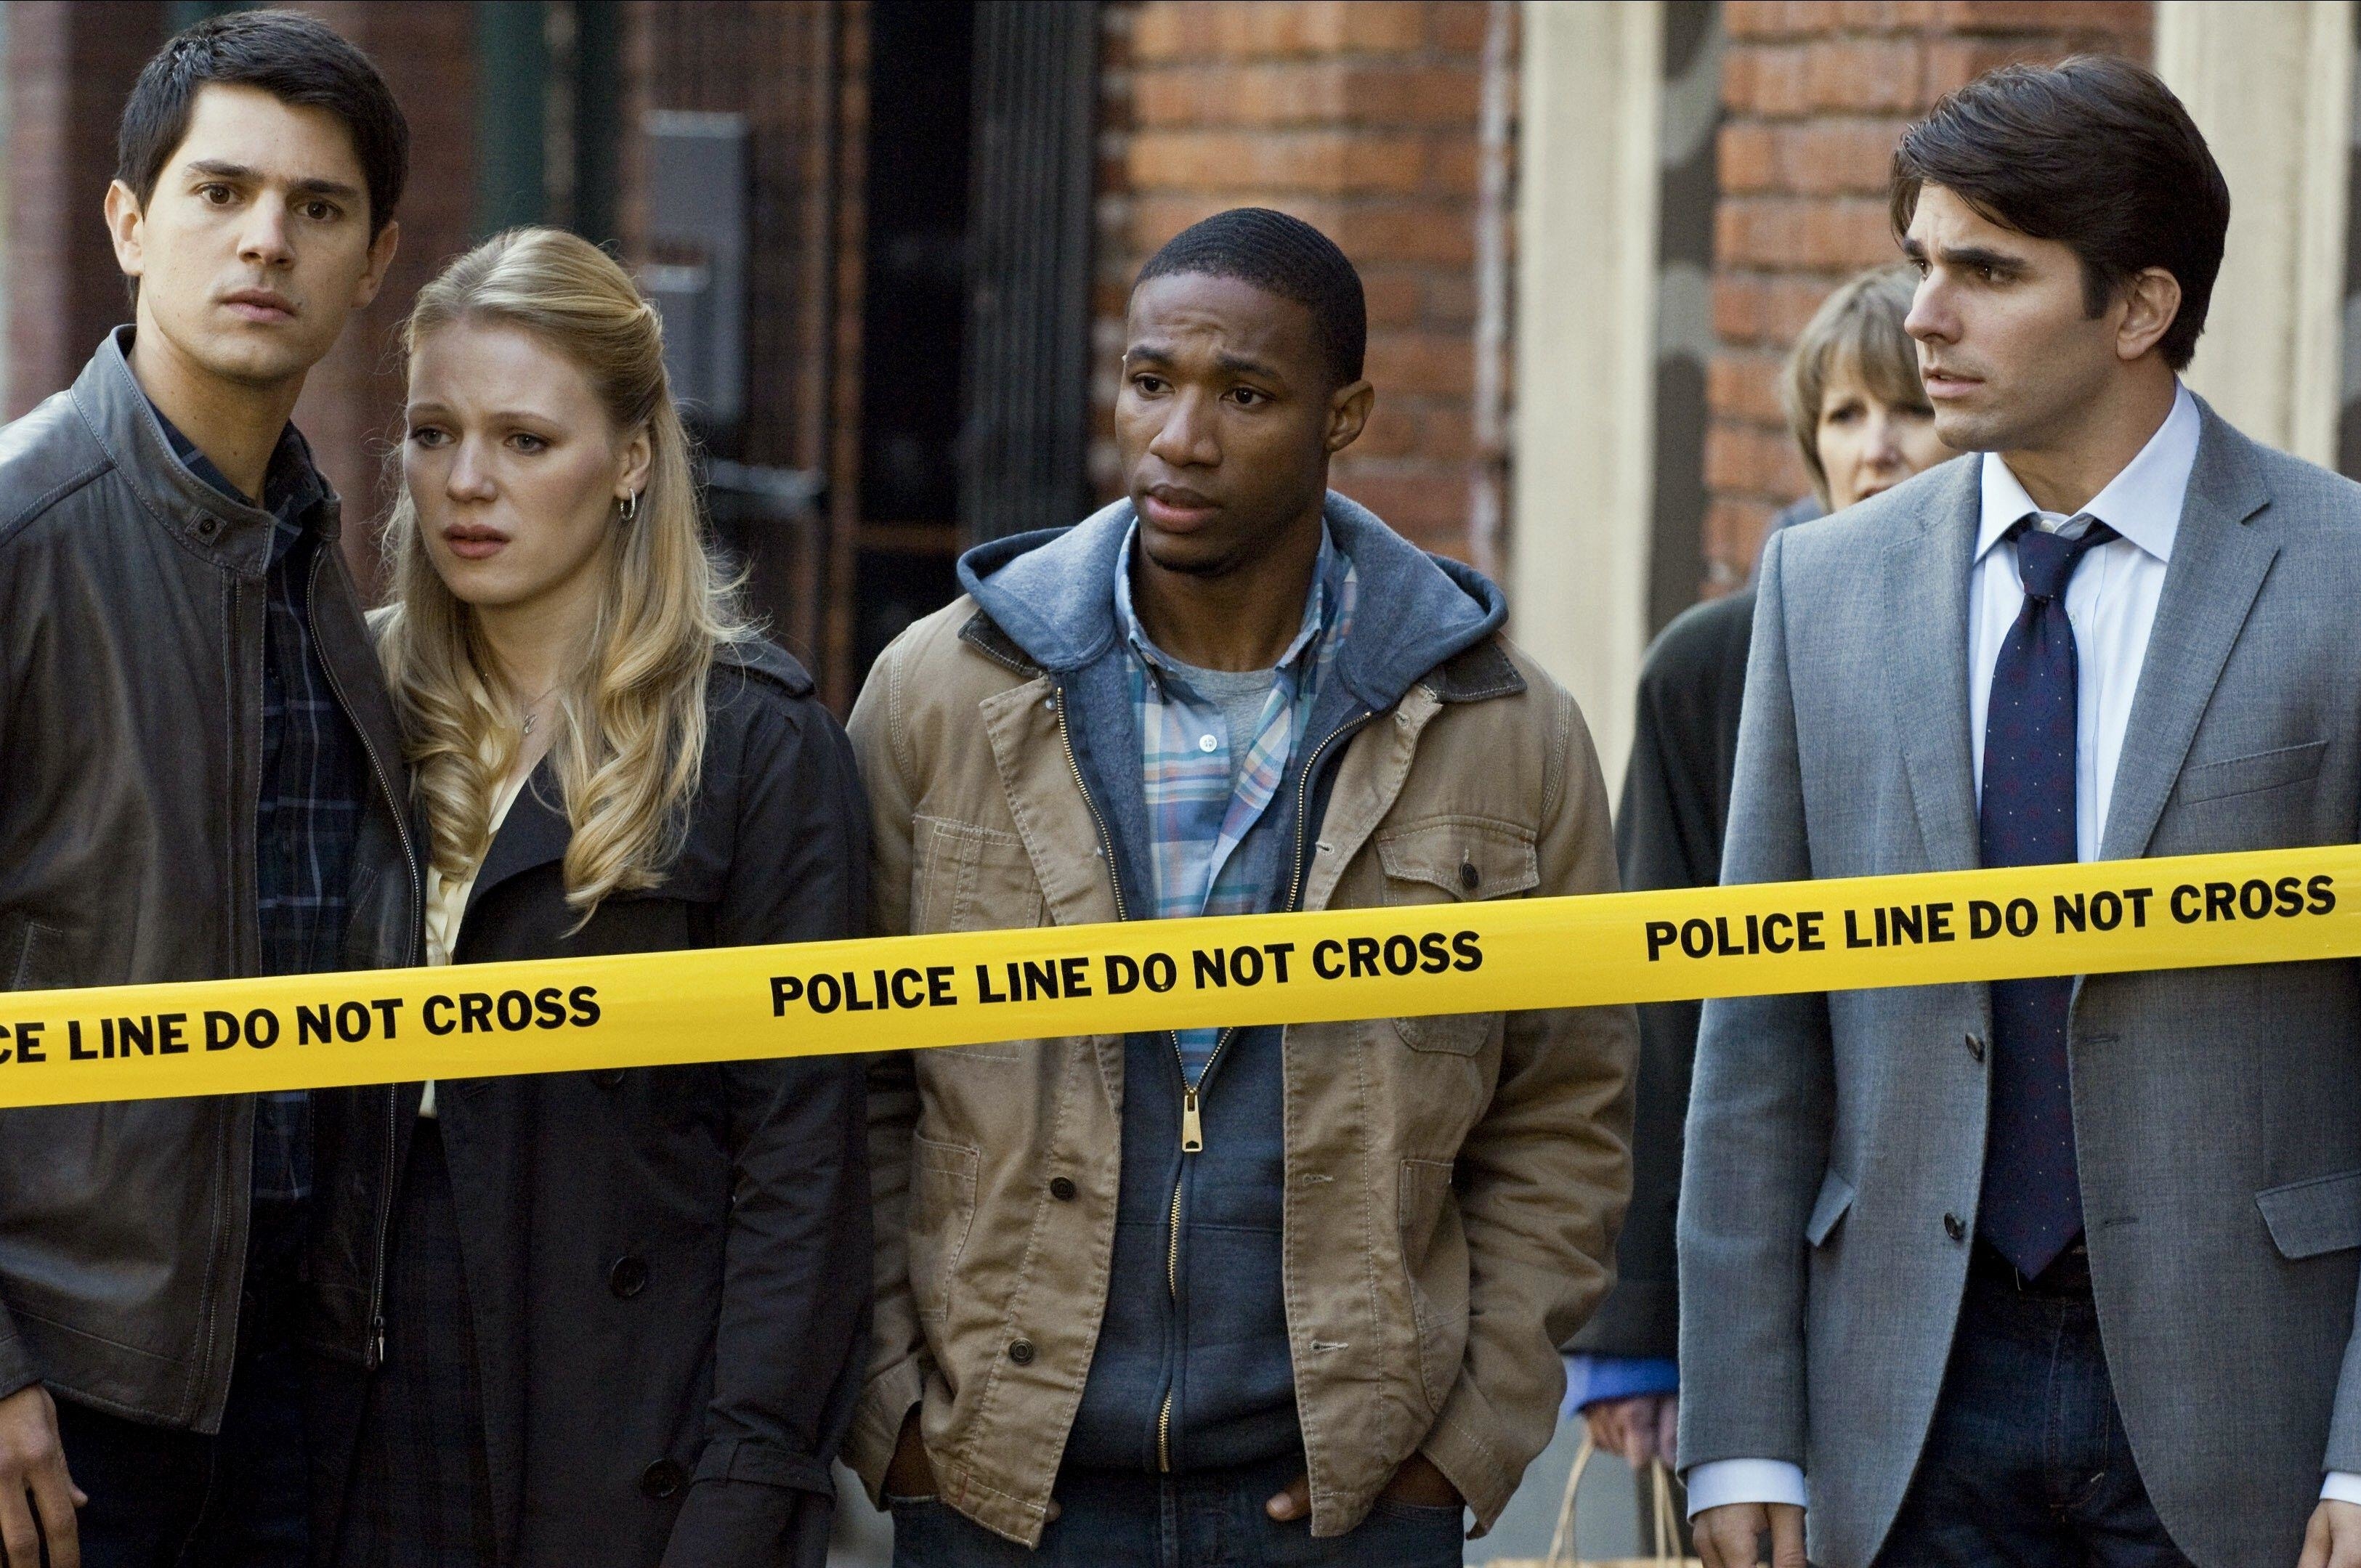 The cast of Final Destination look concerned near a crime scene sectioned off by police tape